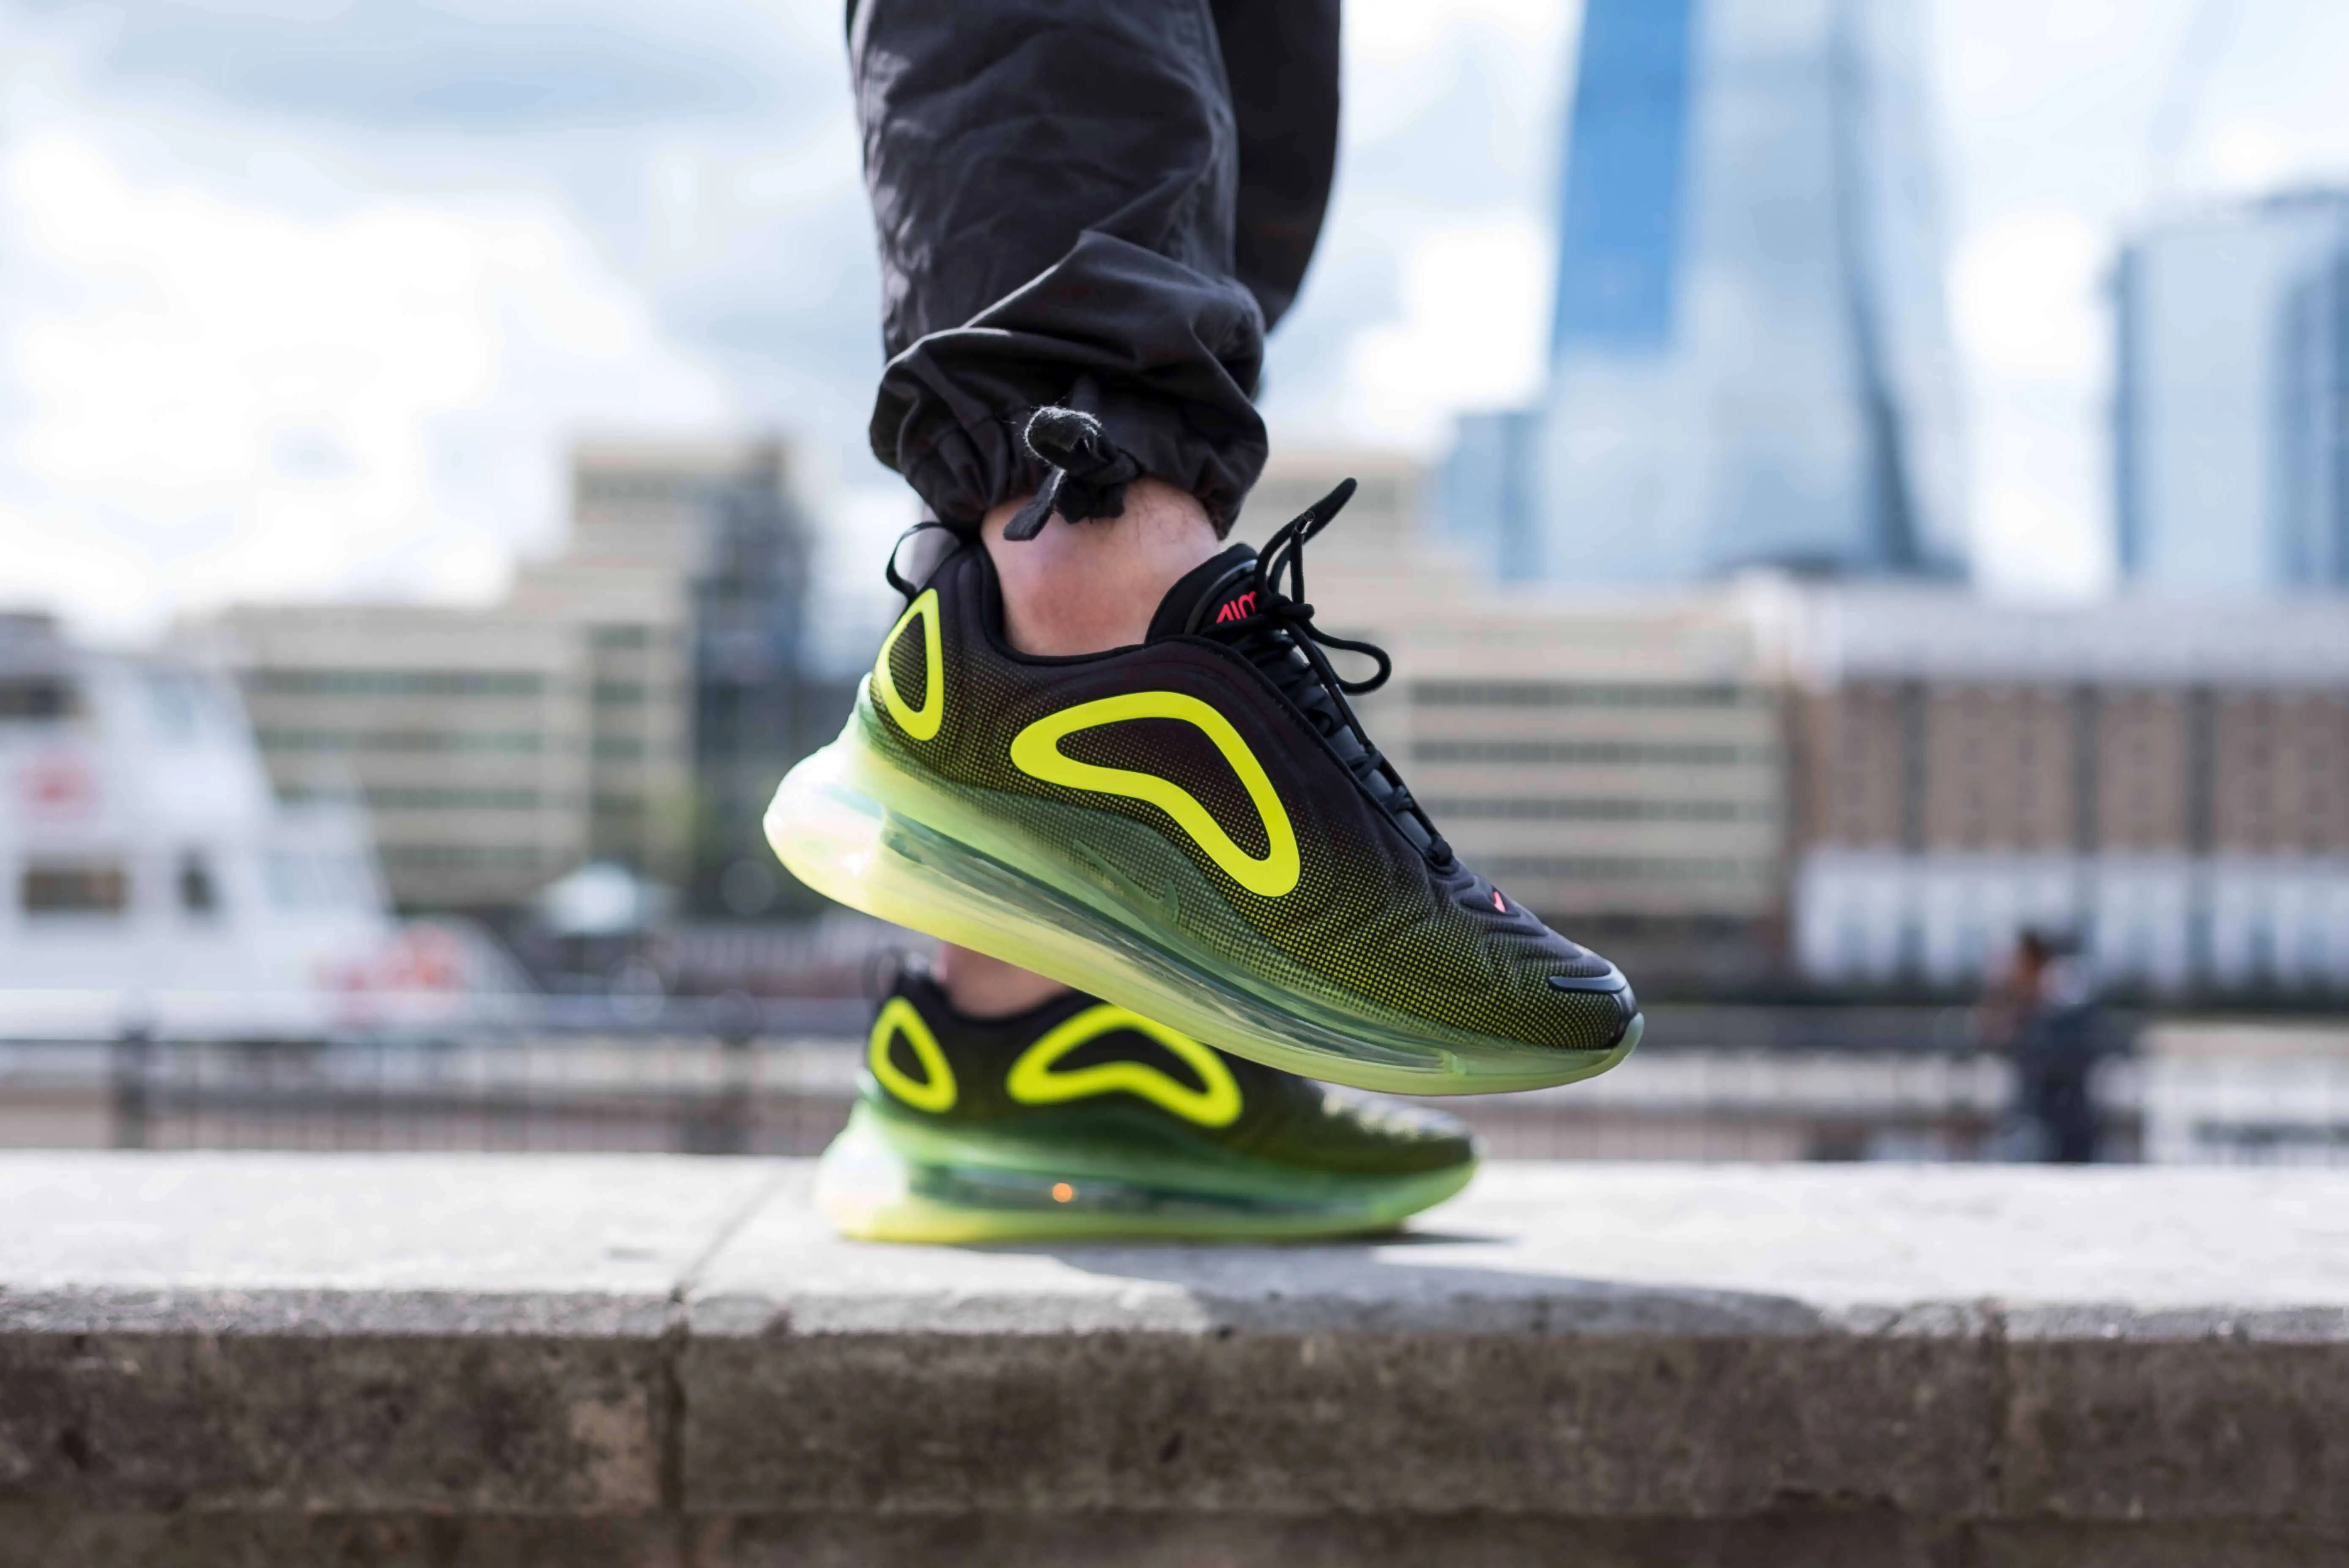 Take An On-Foot Look At The Nike Air Max 720 'Black/Volt' | The